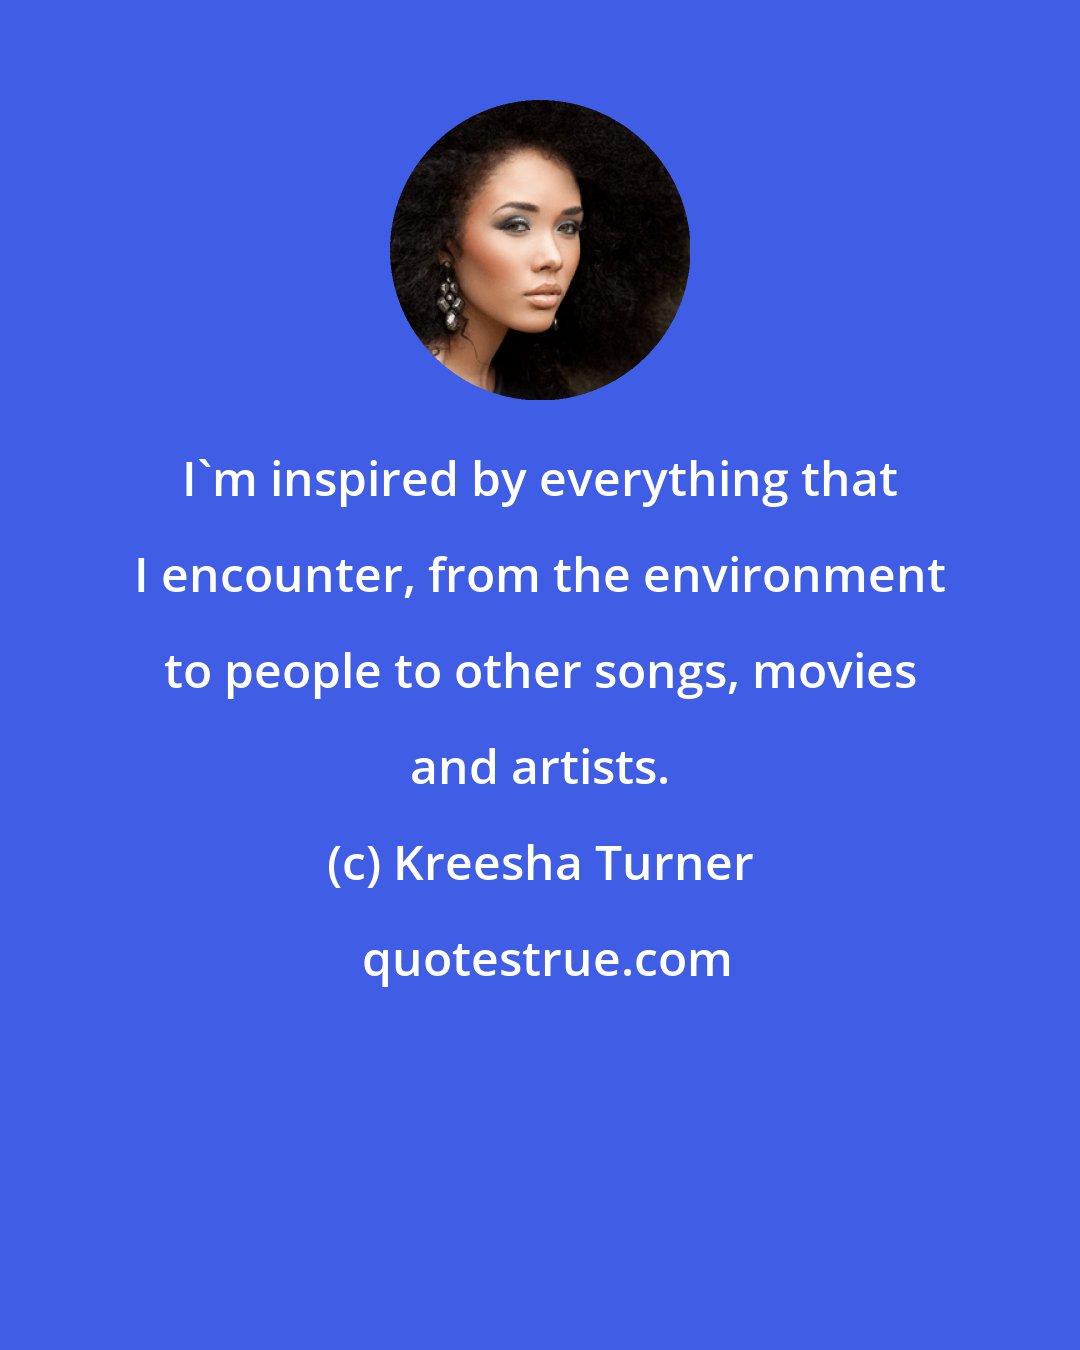 Kreesha Turner: I'm inspired by everything that I encounter, from the environment to people to other songs, movies and artists.